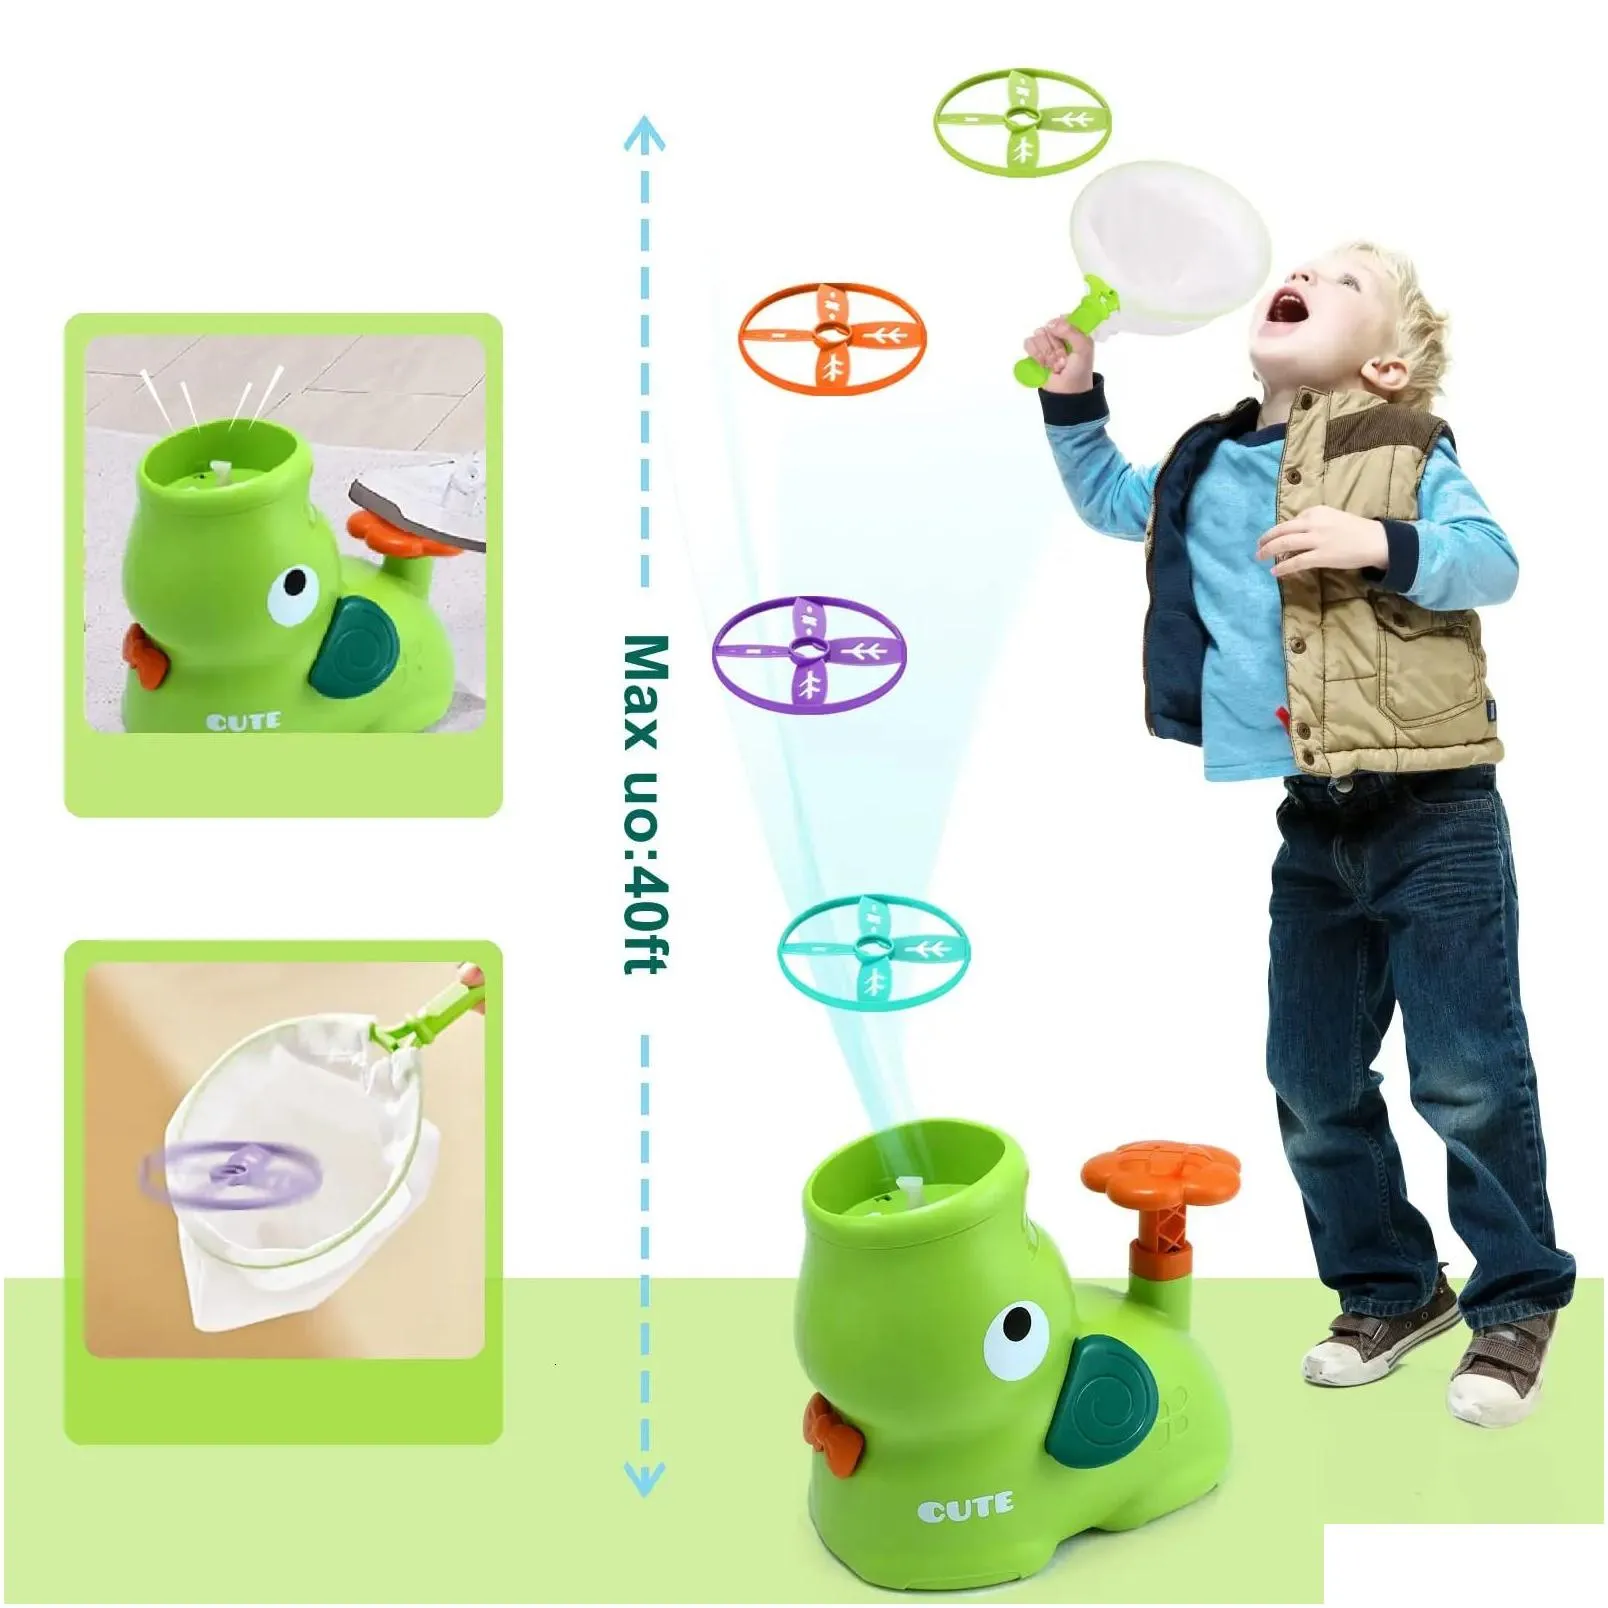 Sports Toys Kids Outdoor Game Flying Discs Air Rocket Launcher Feet-Mounted Flying Saucer Interactive Garden Sports Toy for Children